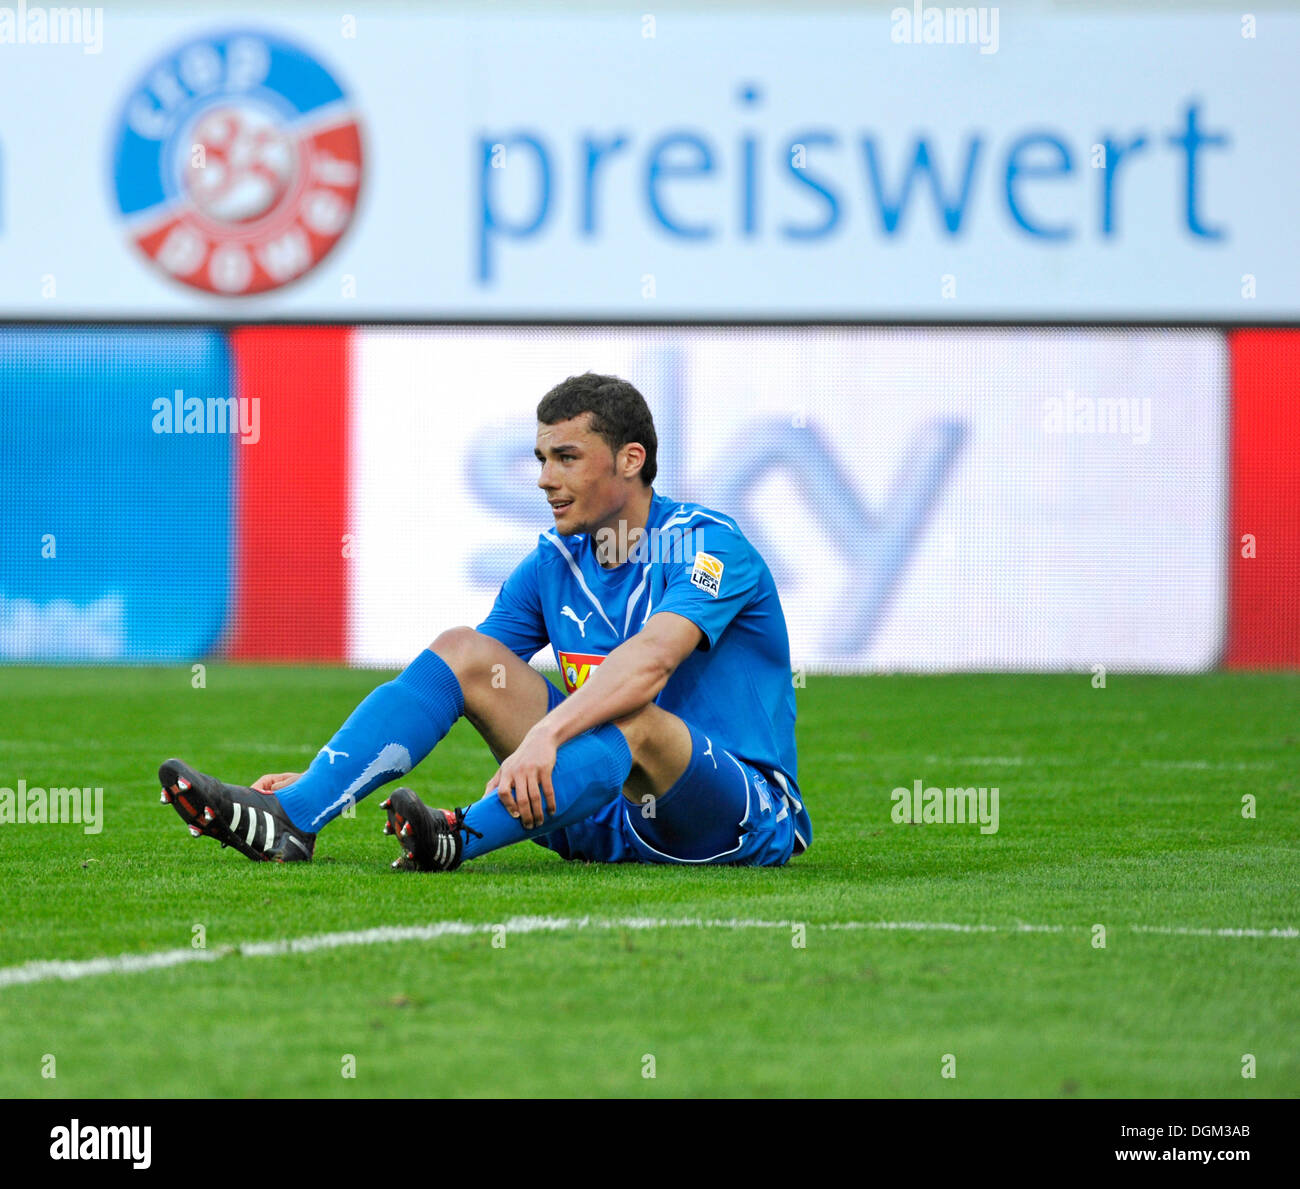 Manuel Guide of TSG 1899 Hoffenheim disappointed, sitting on the ground in front of an advertising board labelled 'preiswert', Stock Photo